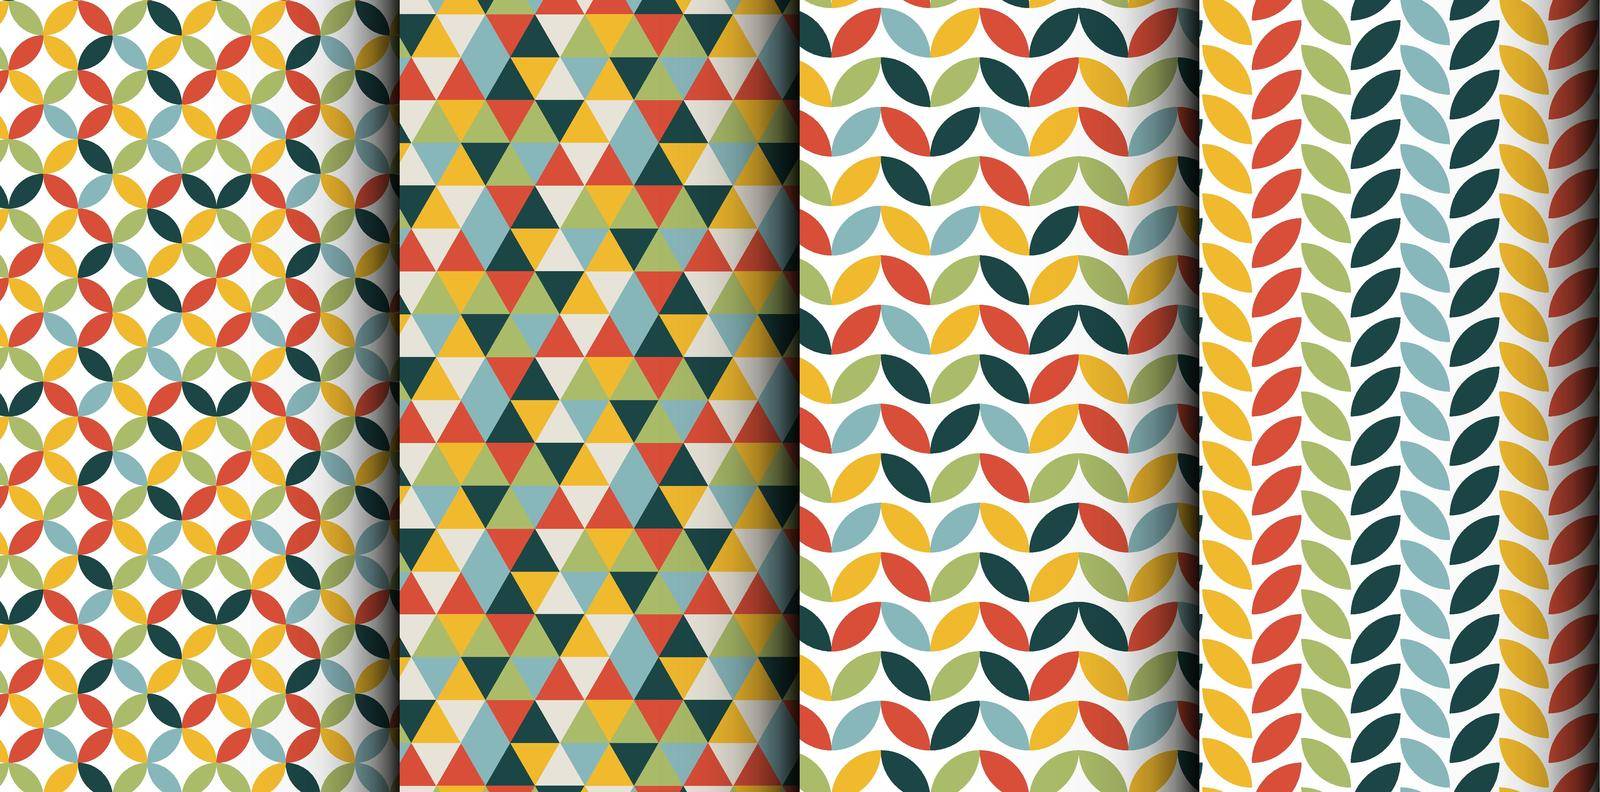 Four Retro minimalistic geometric abstract background seamless pattern tiles made from basic geometry shapes. Old retro styled patterns from 70s and 80s years